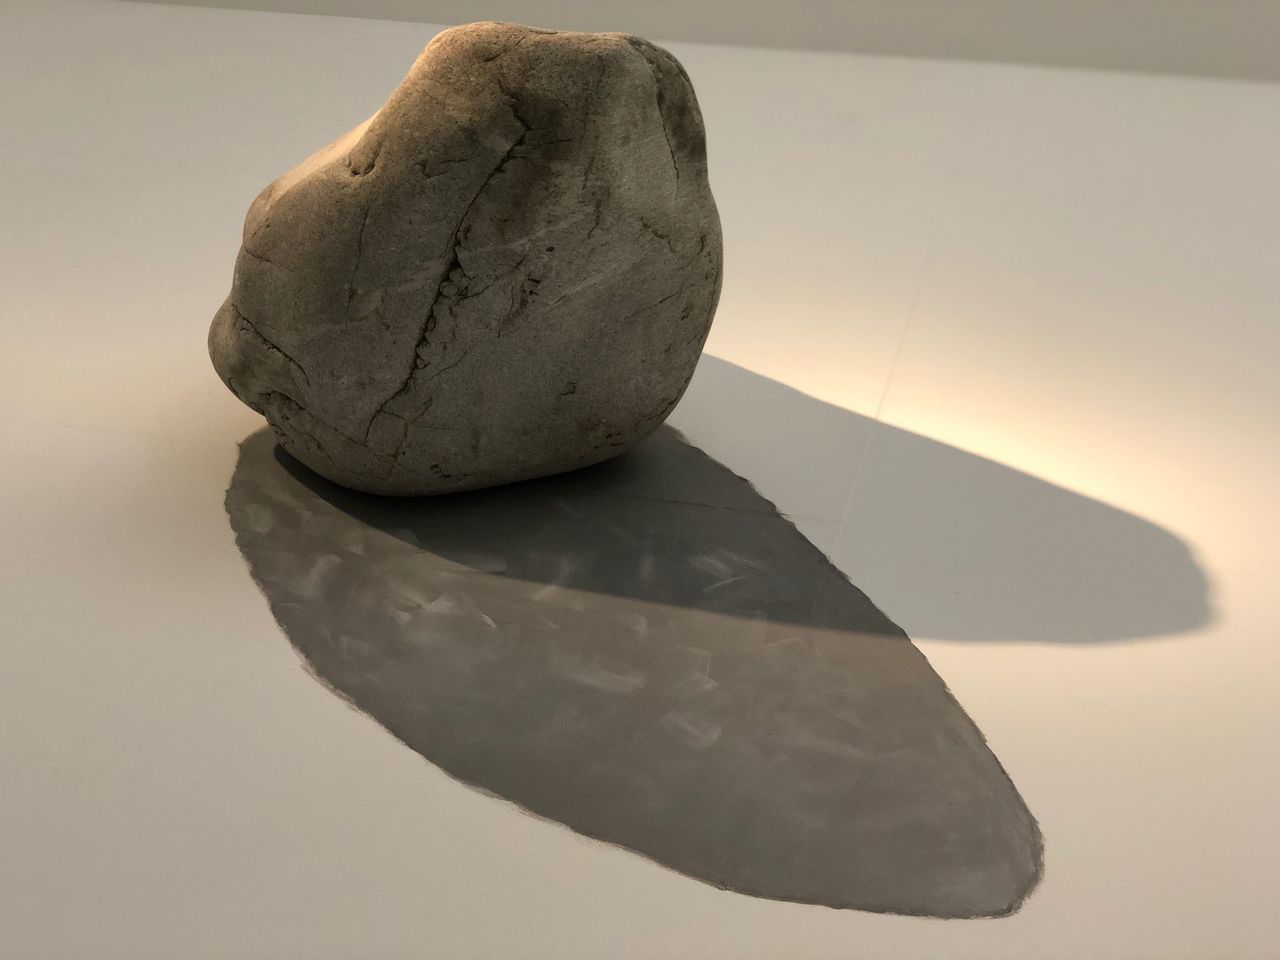 CLOSE-UP OF ROCK ON TABLE